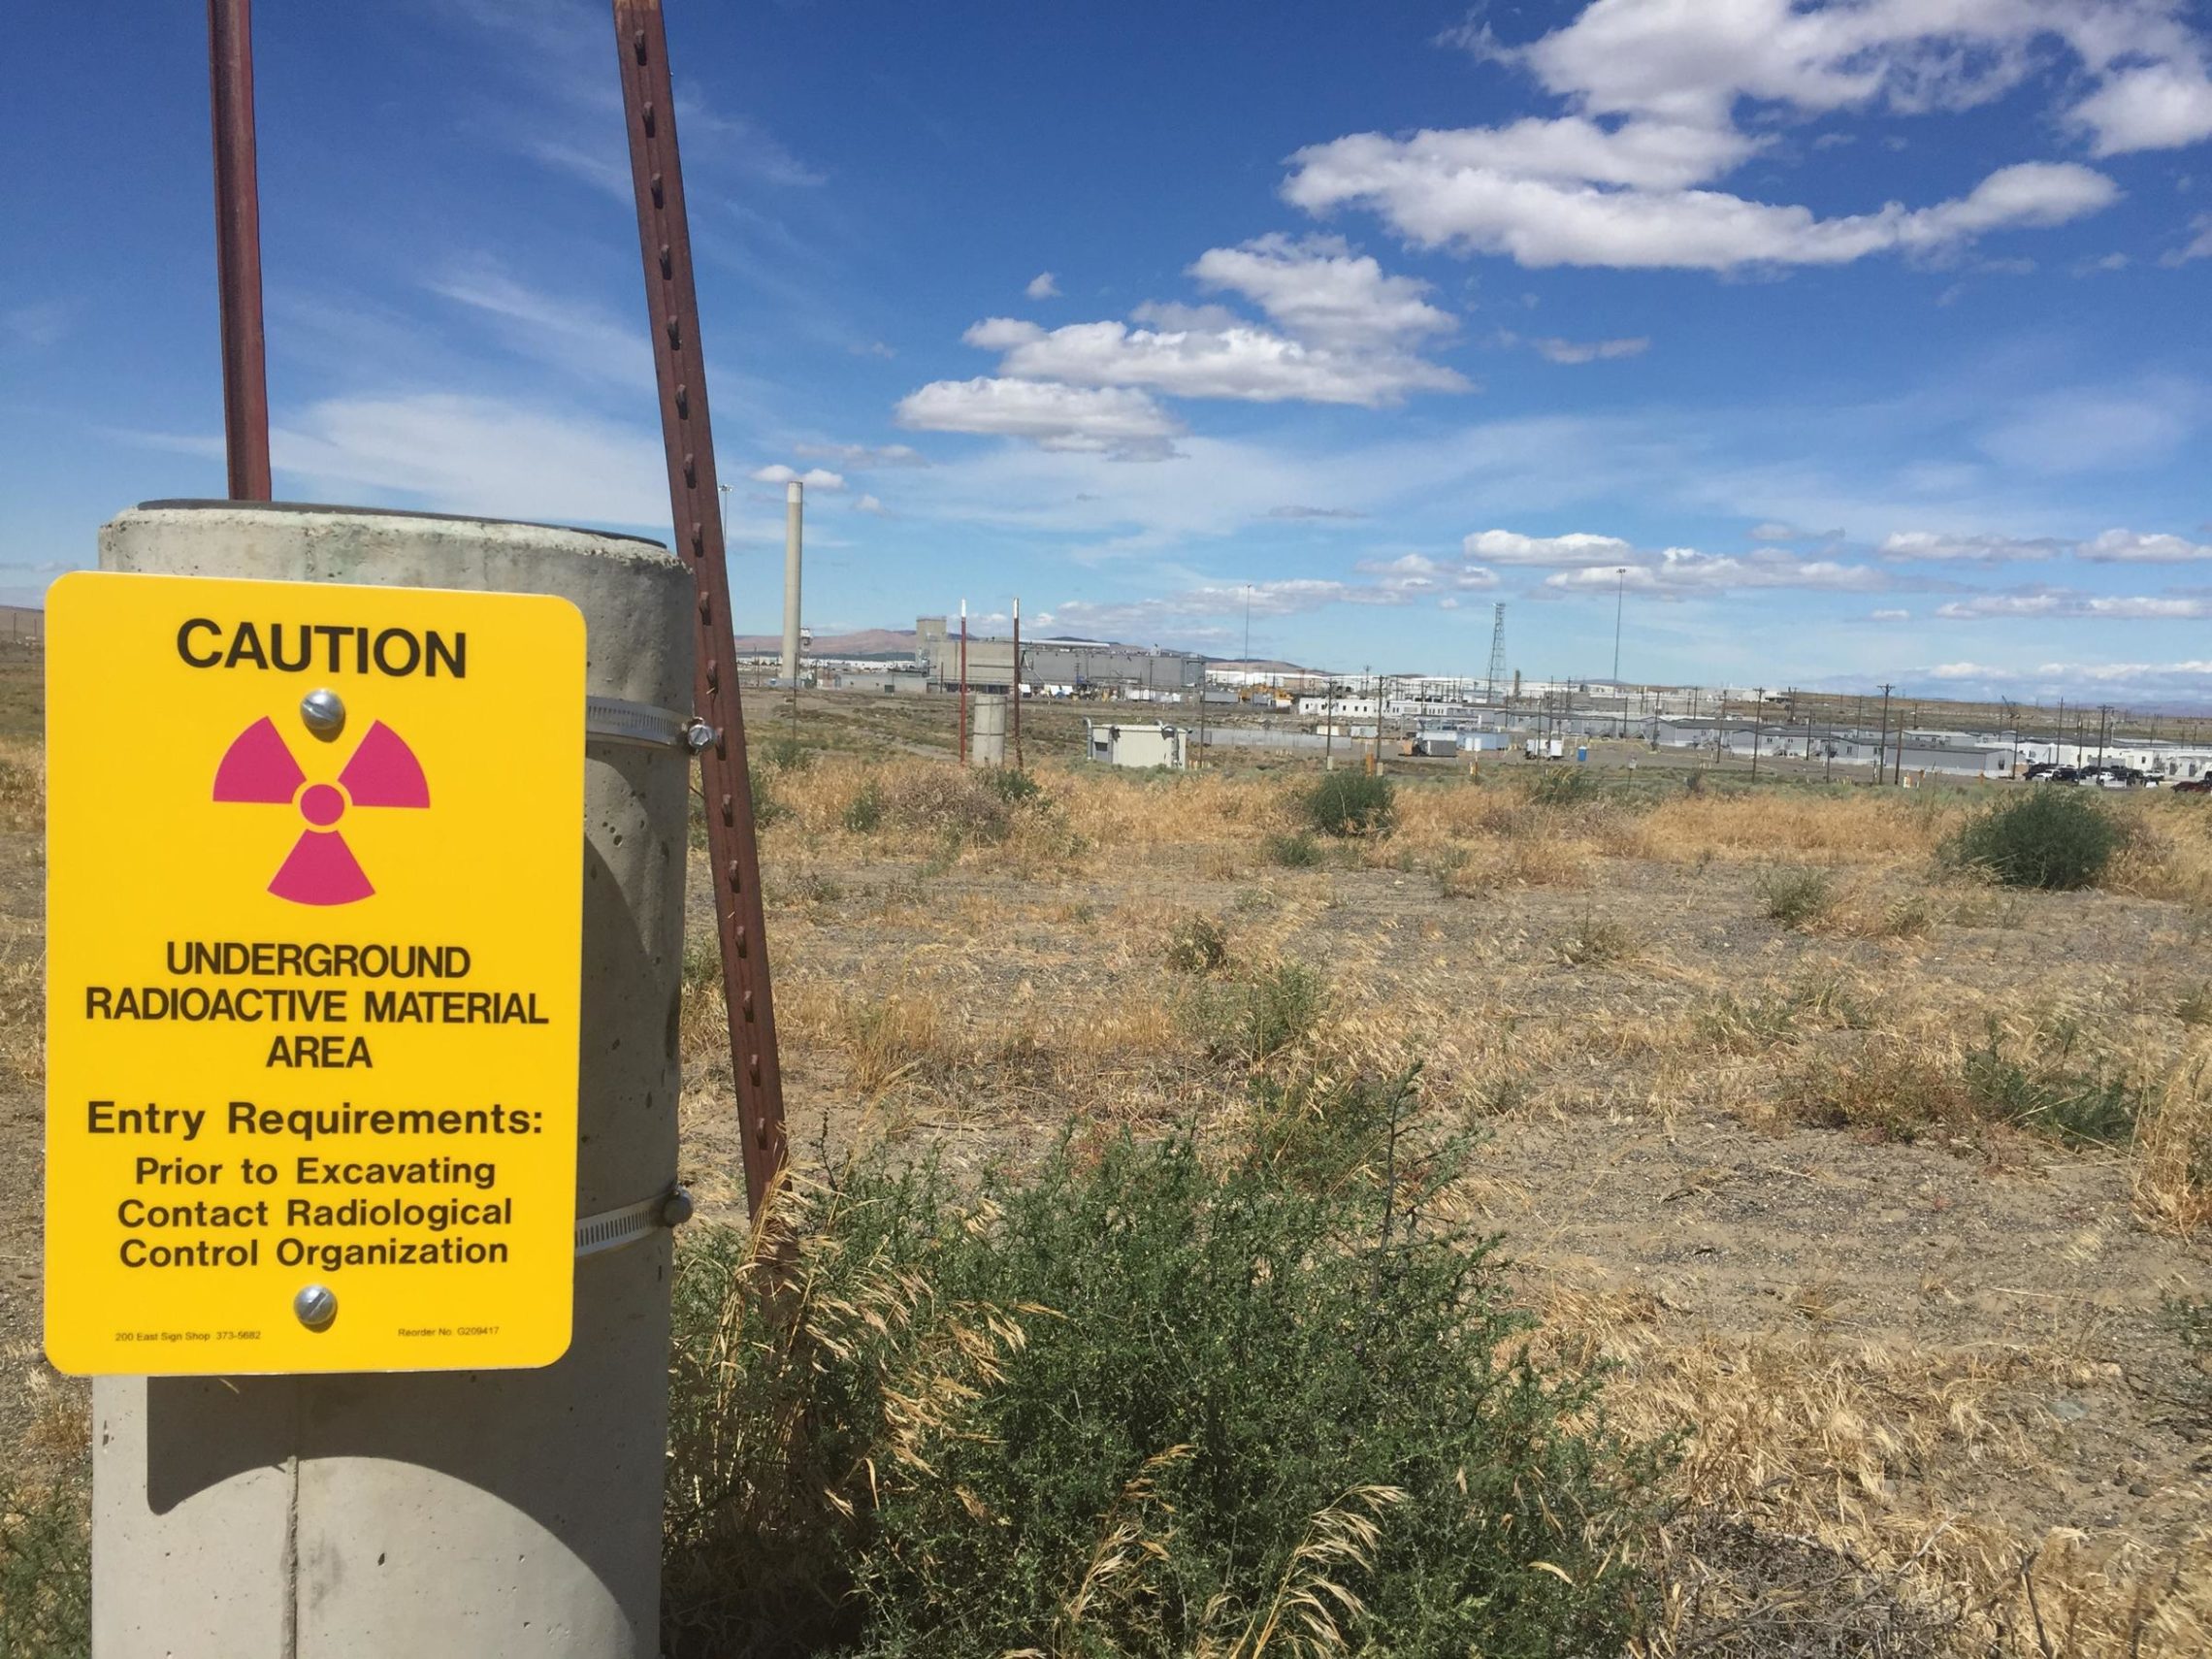 As many as 10 workers at Hanford have inhaled or ingested radioactive particles at the Plutonium Finishing Plant demolition site. CREDIT: ANNA KING / NORTHWEST NEWS NETWORK